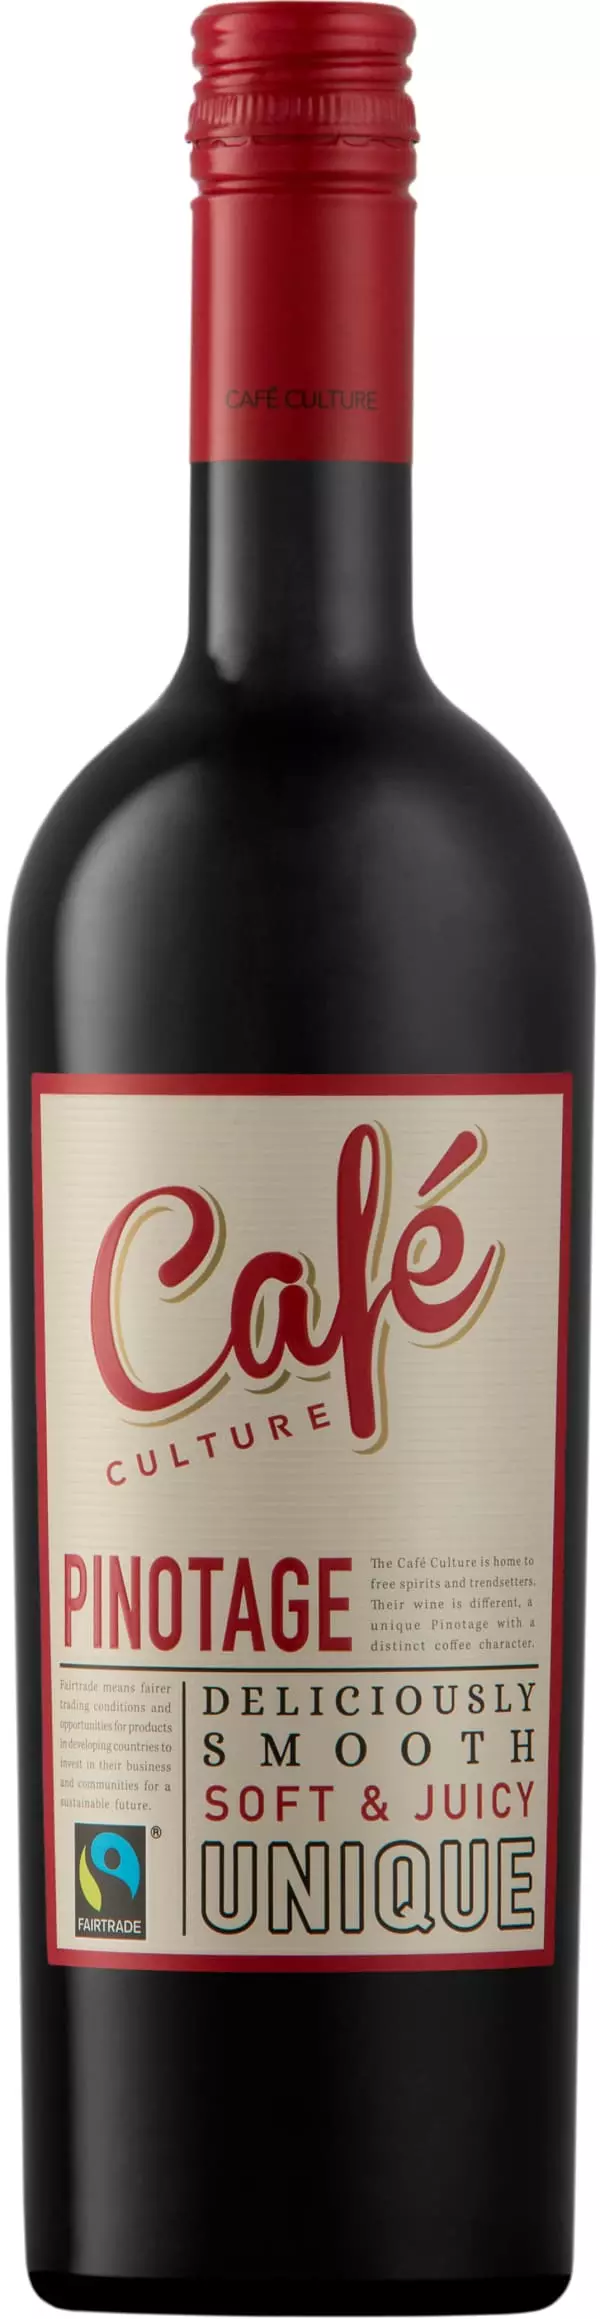 Cafe Culture Pinotage 2021